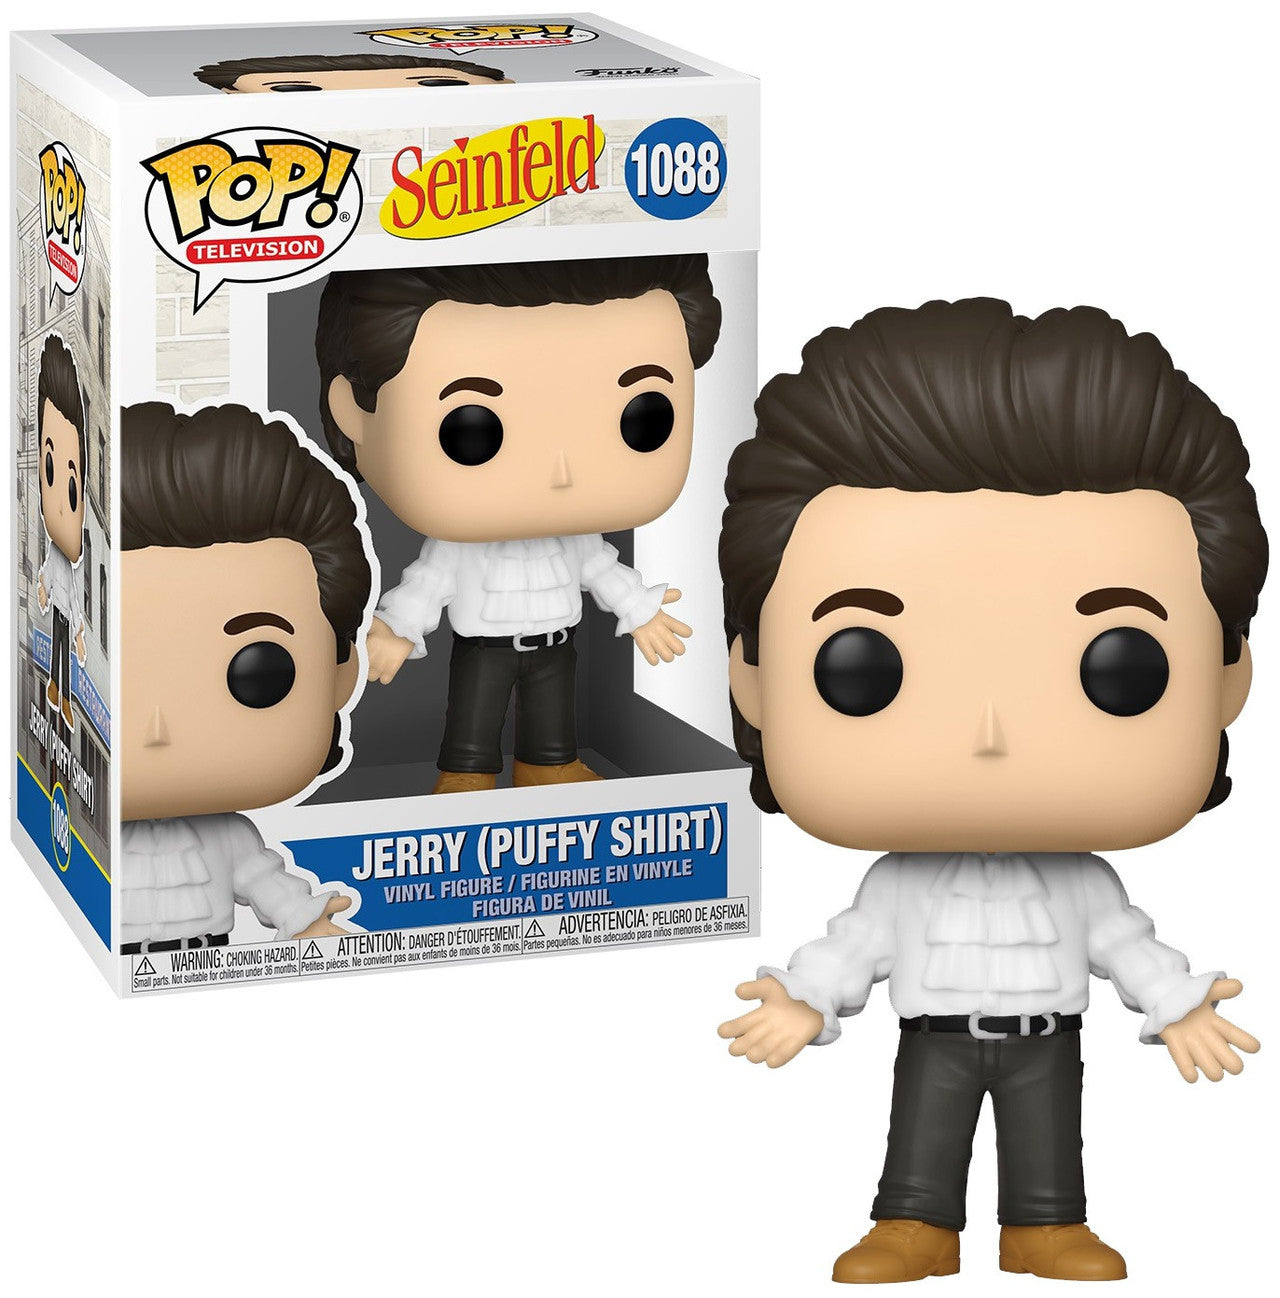 Funko Pop! Television: Seinfeld 1088 - Jerry (puffy shirt) + FREE PROTECTOR!